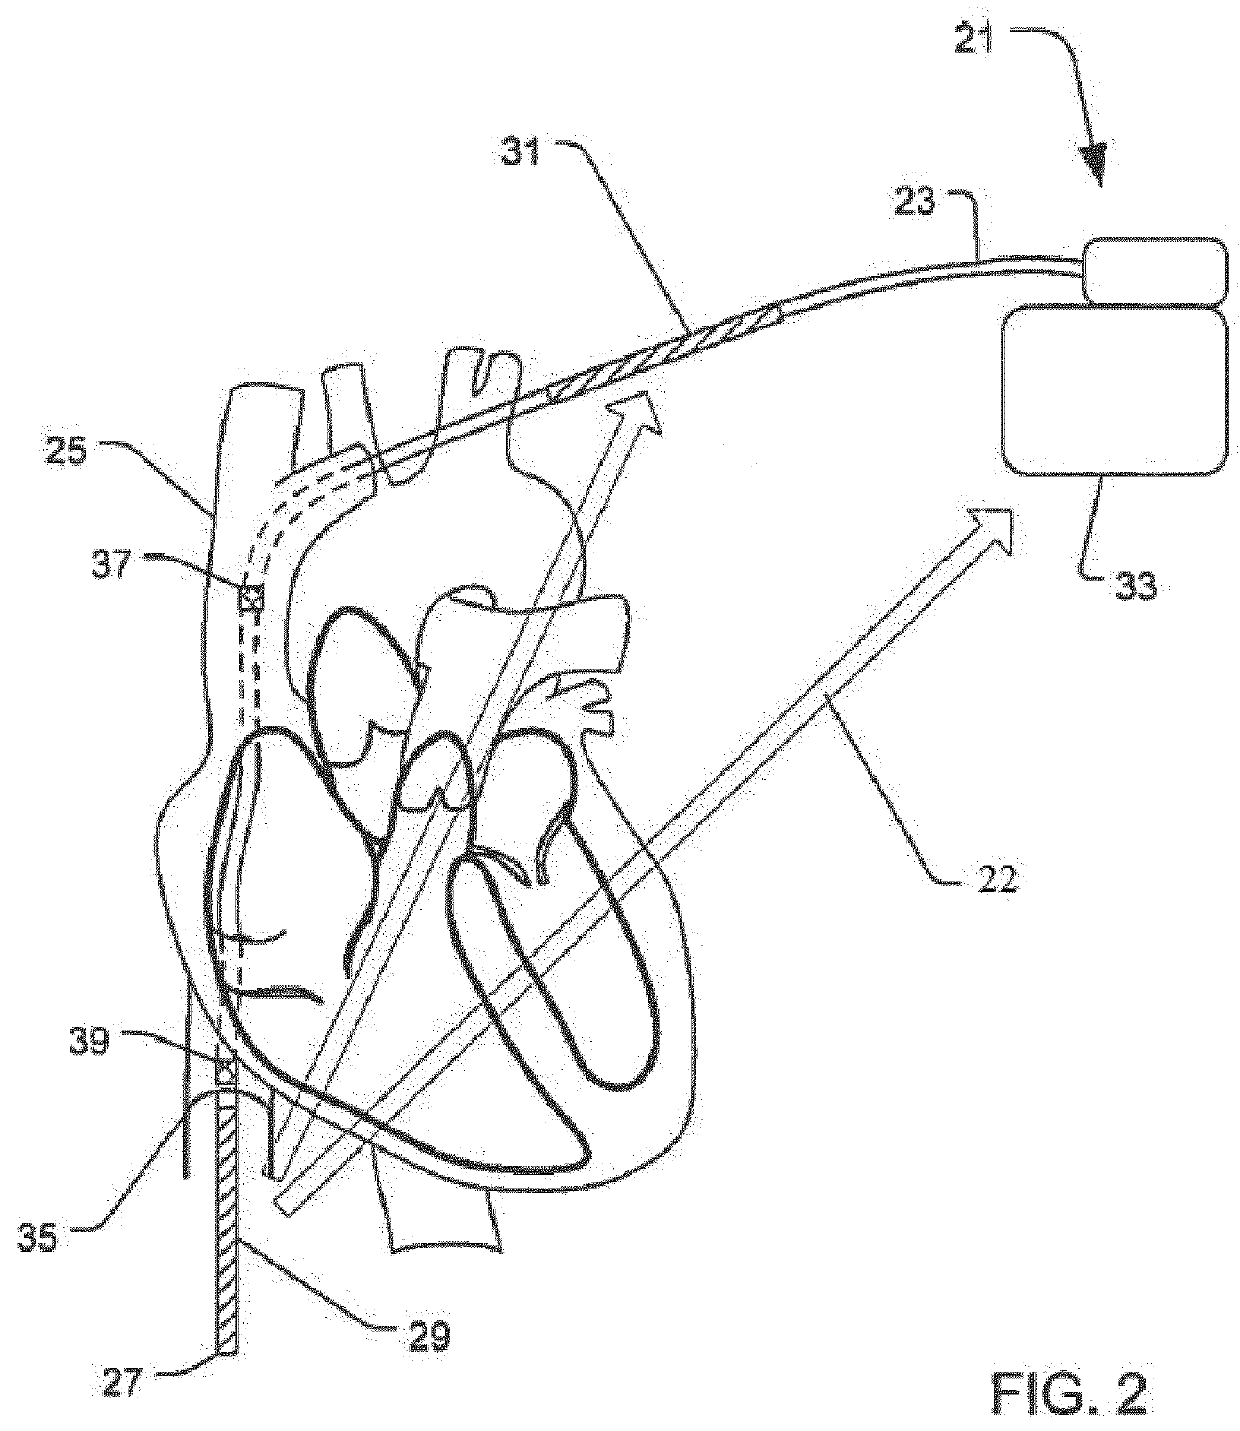 System and method for extra cardiac defibrillation